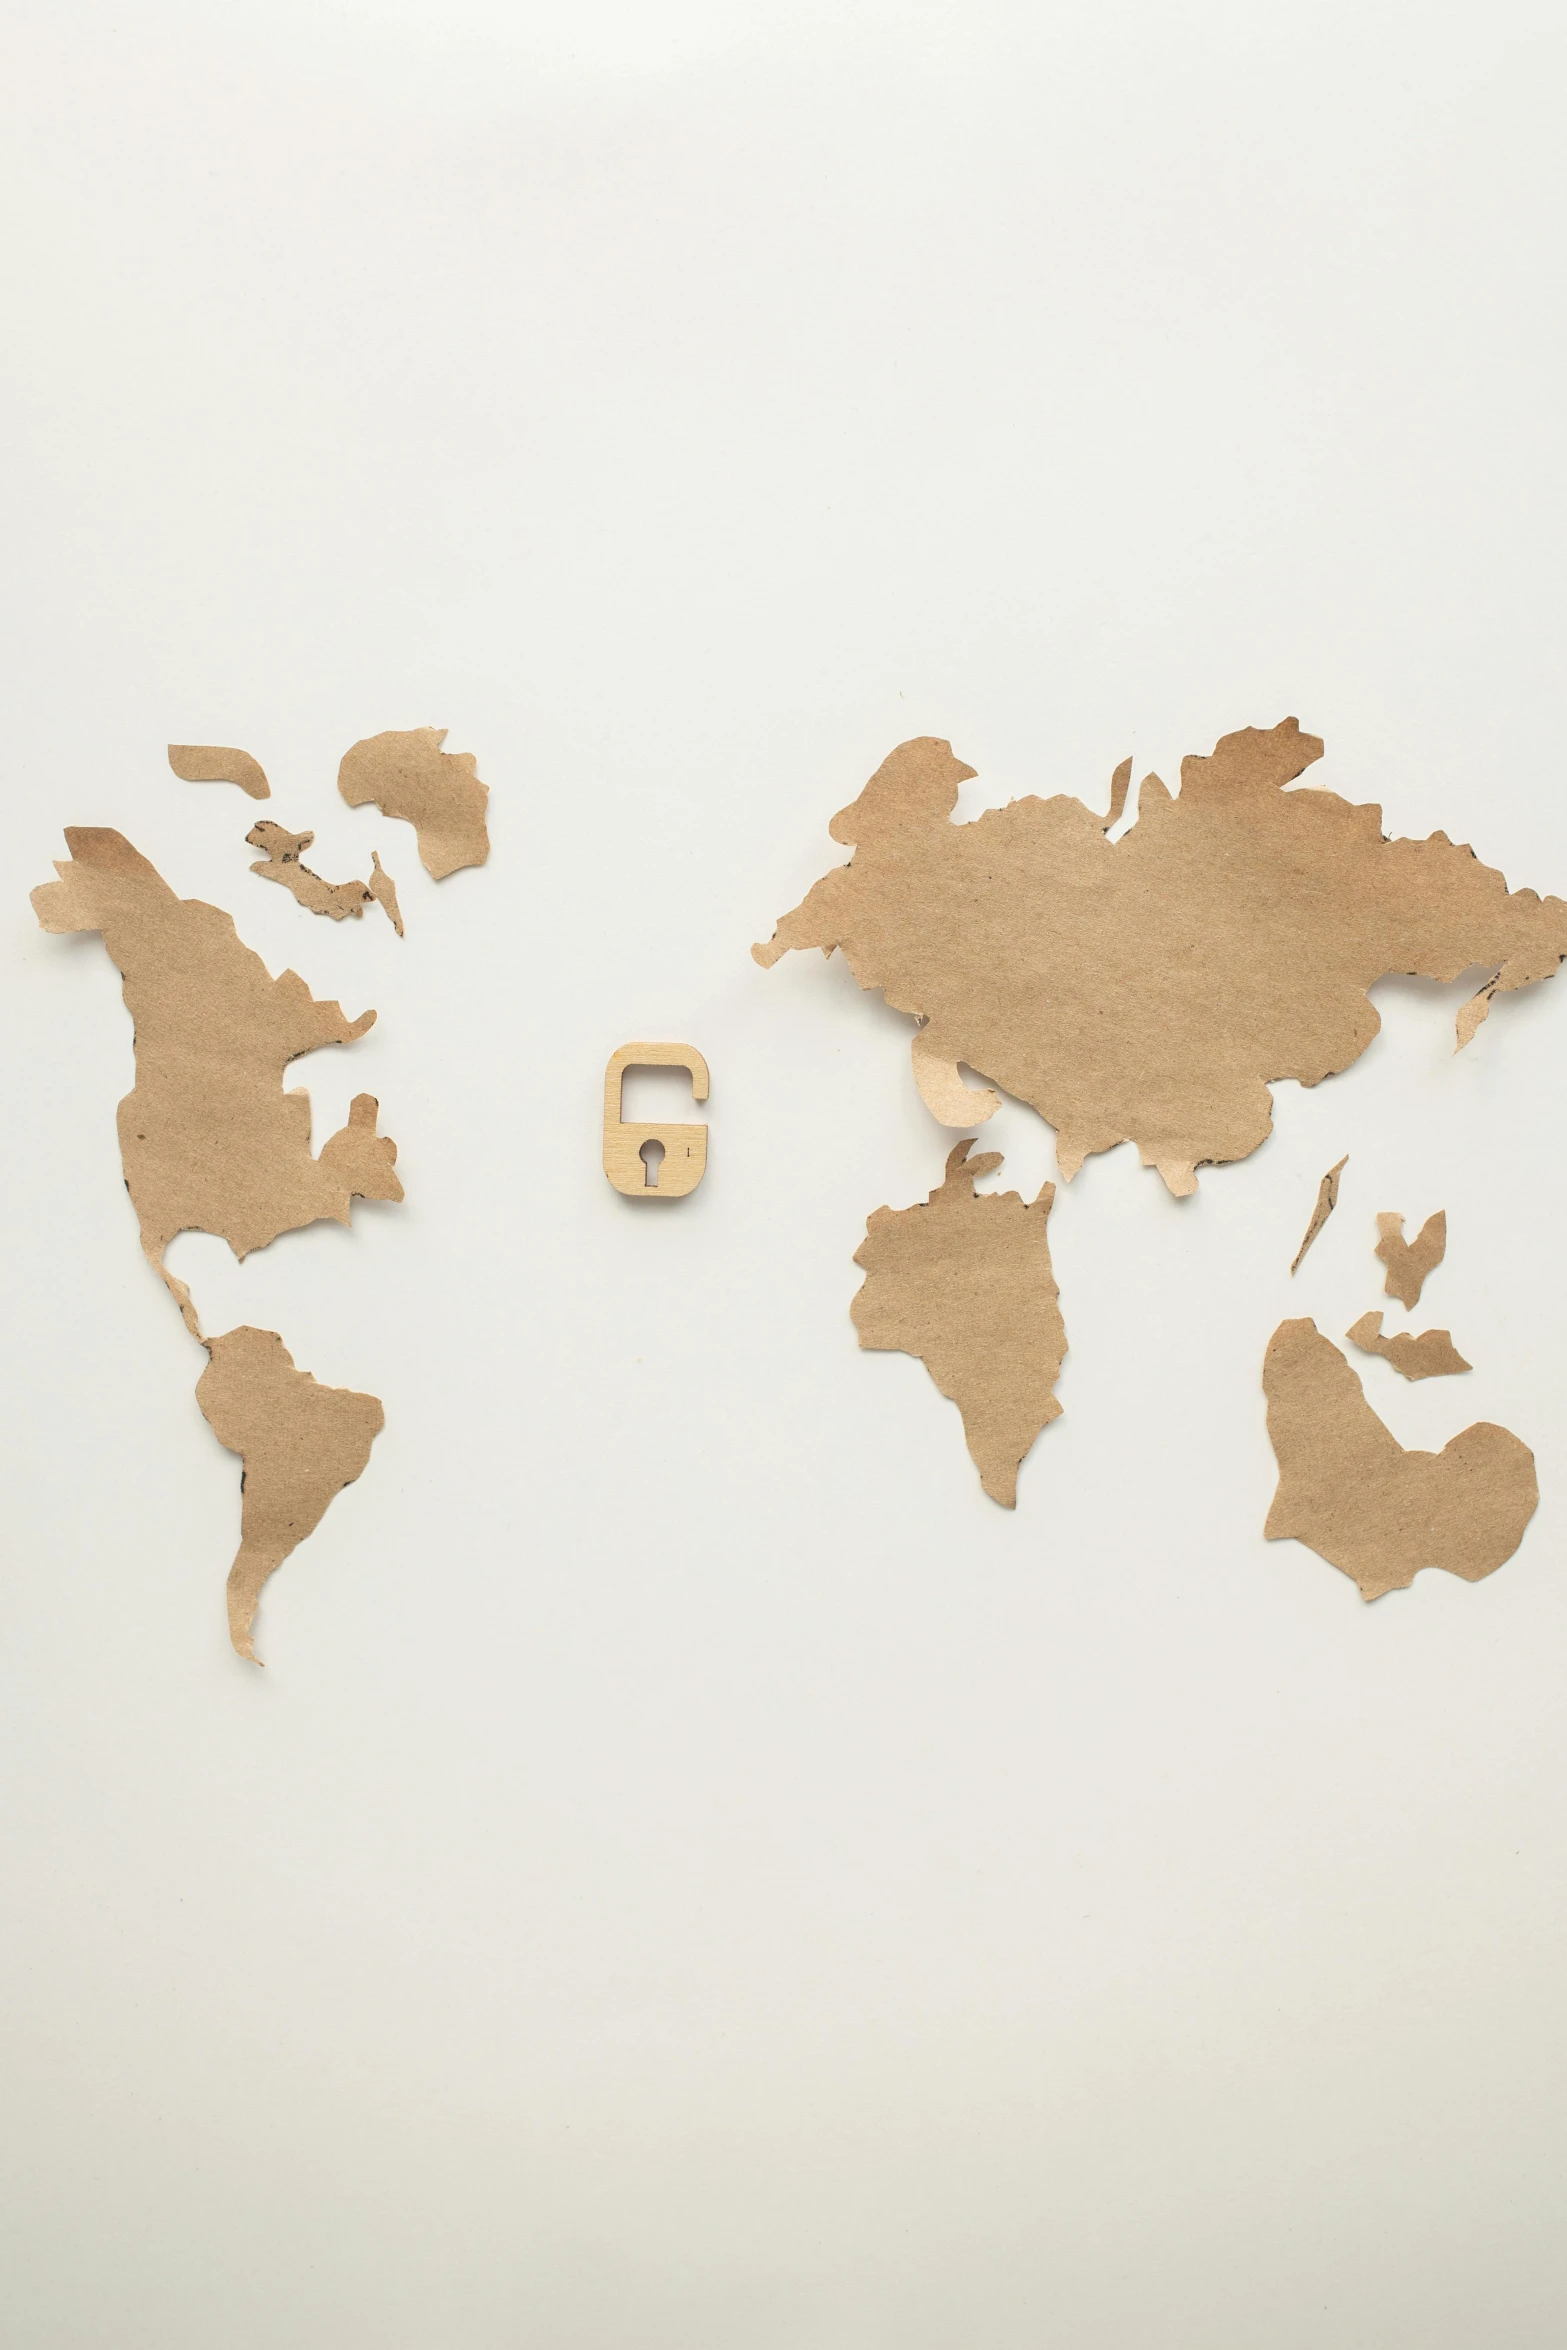 a map of the world cut out of cardboard, by Will Ellis, trending on pexels, conceptual art, pareidolia, map key, global light, plain background